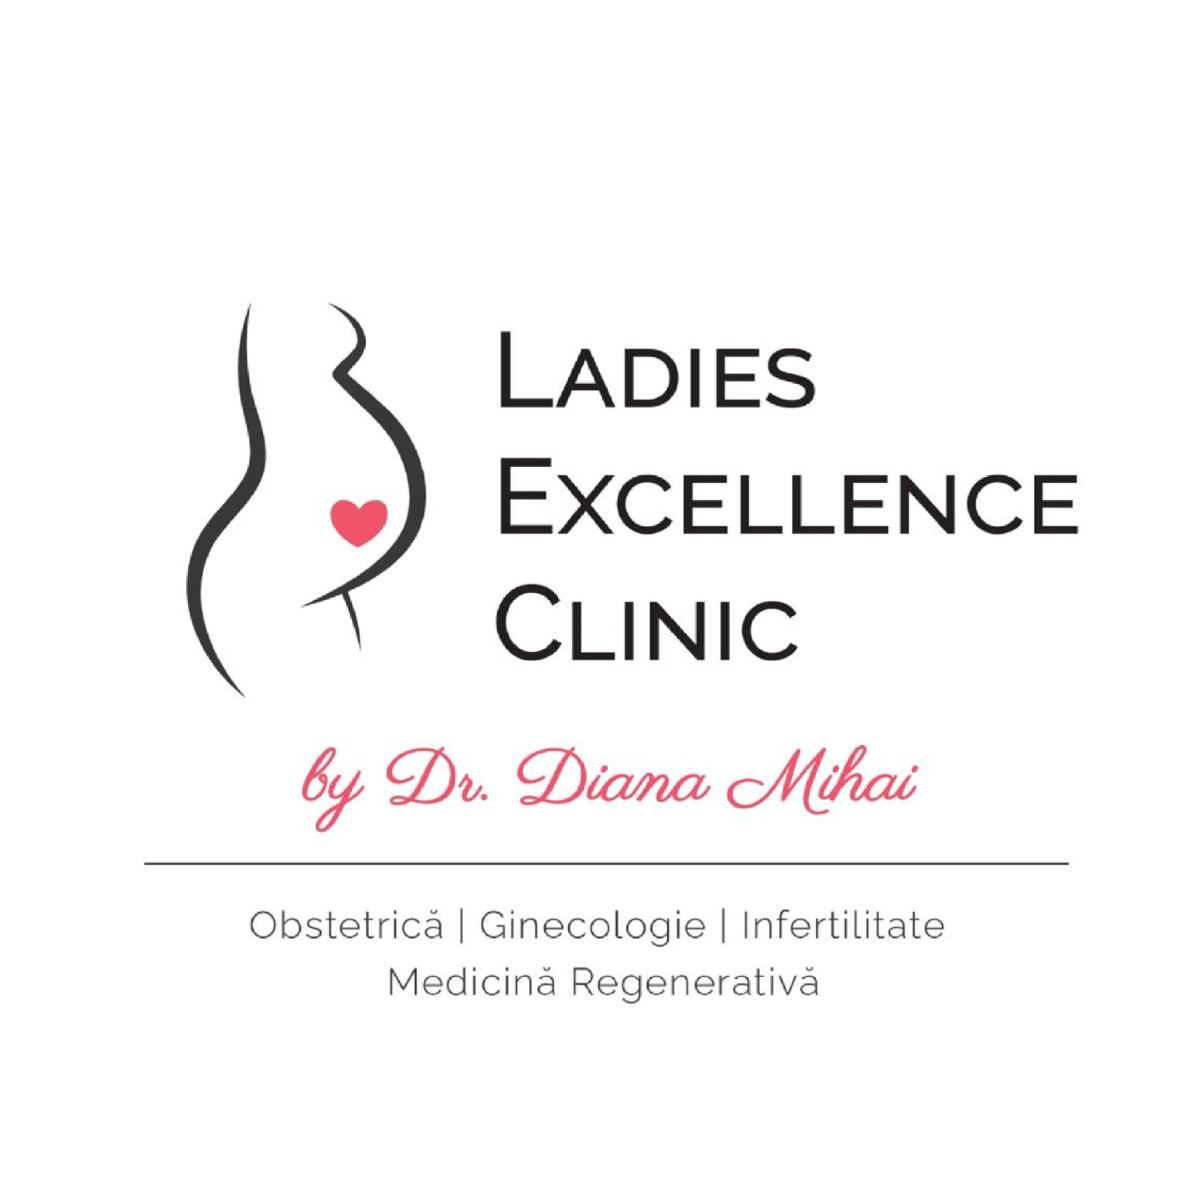 Ladies Excelence Clinic Dr. Diana Mihai